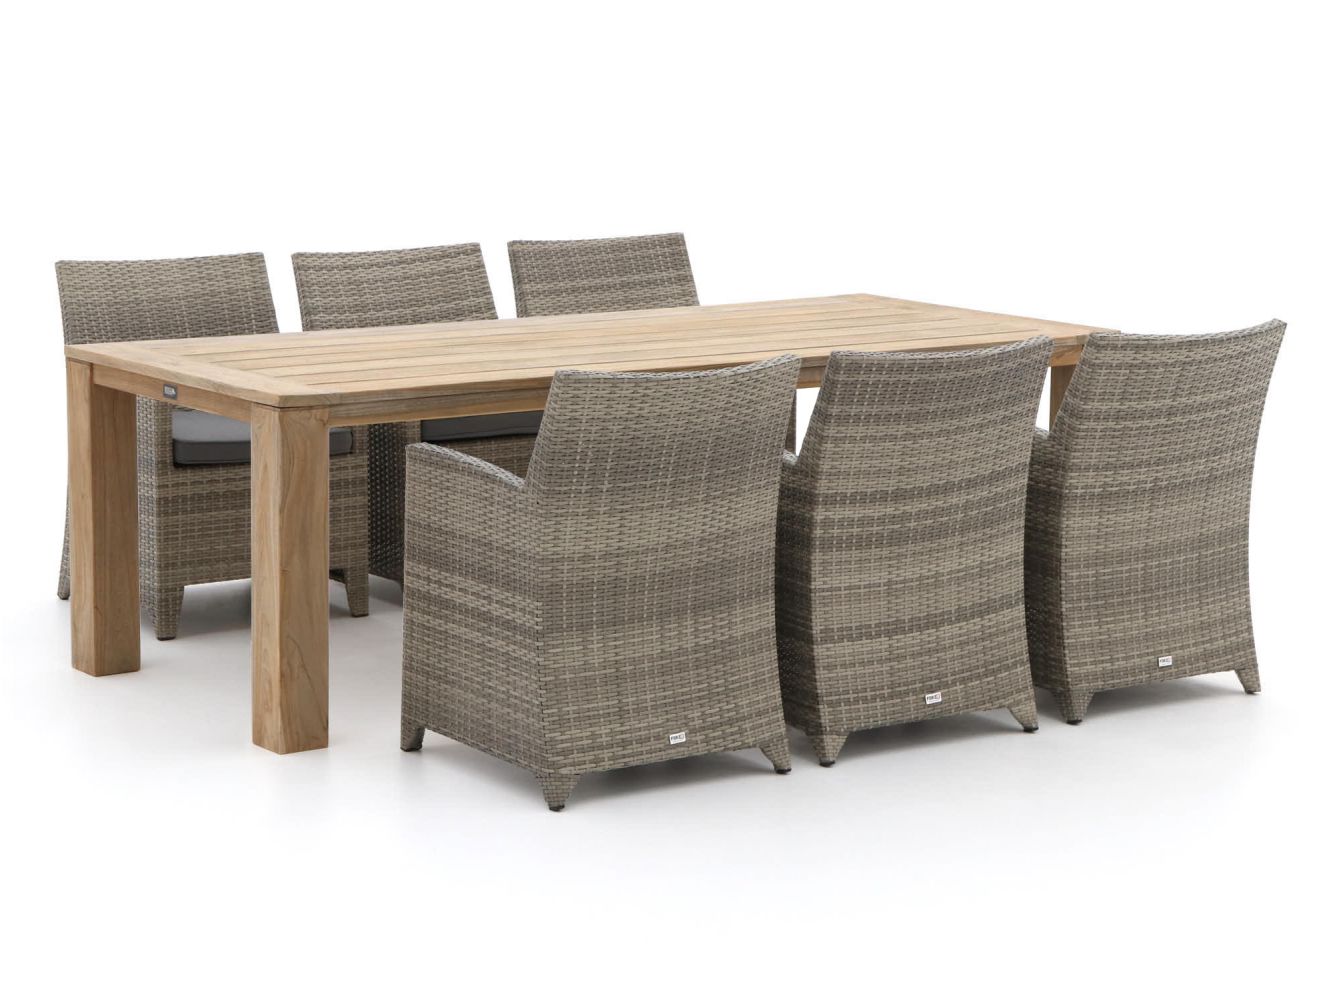 eedfcd3b6ba7fb66e2d5c024403c87f2bec0a132 113696 p01 gm0cykmhnwyfwxnp - Forza Barolo/ROUGH-X 240cm dining tuinset 7-delig